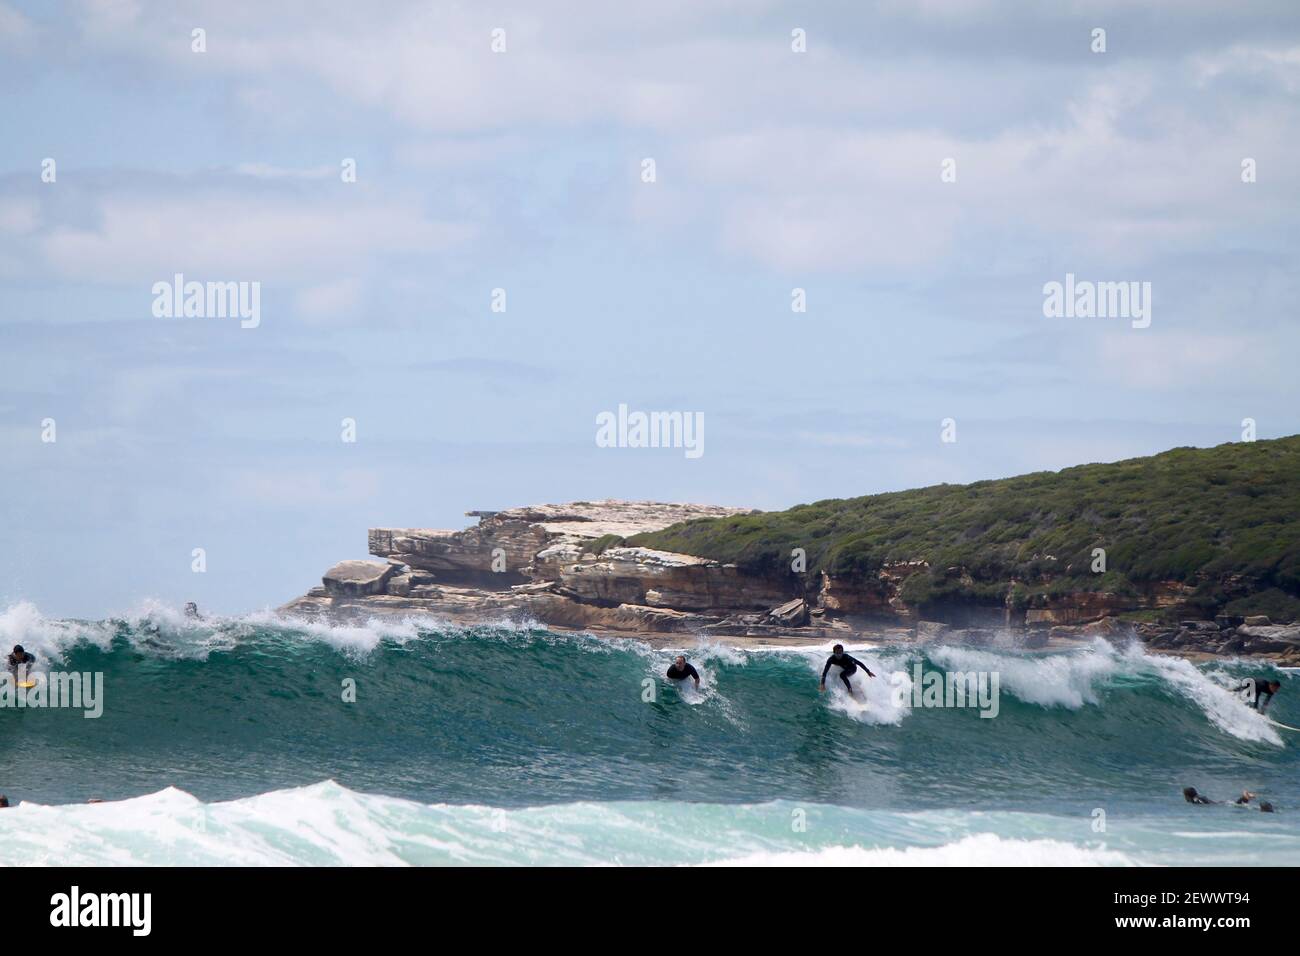 Acrobatic Surfers on the turquoise wave of Maroubra beach near sydney. One surfer got the priority and the one at his right shouldn't go... Stock Photo